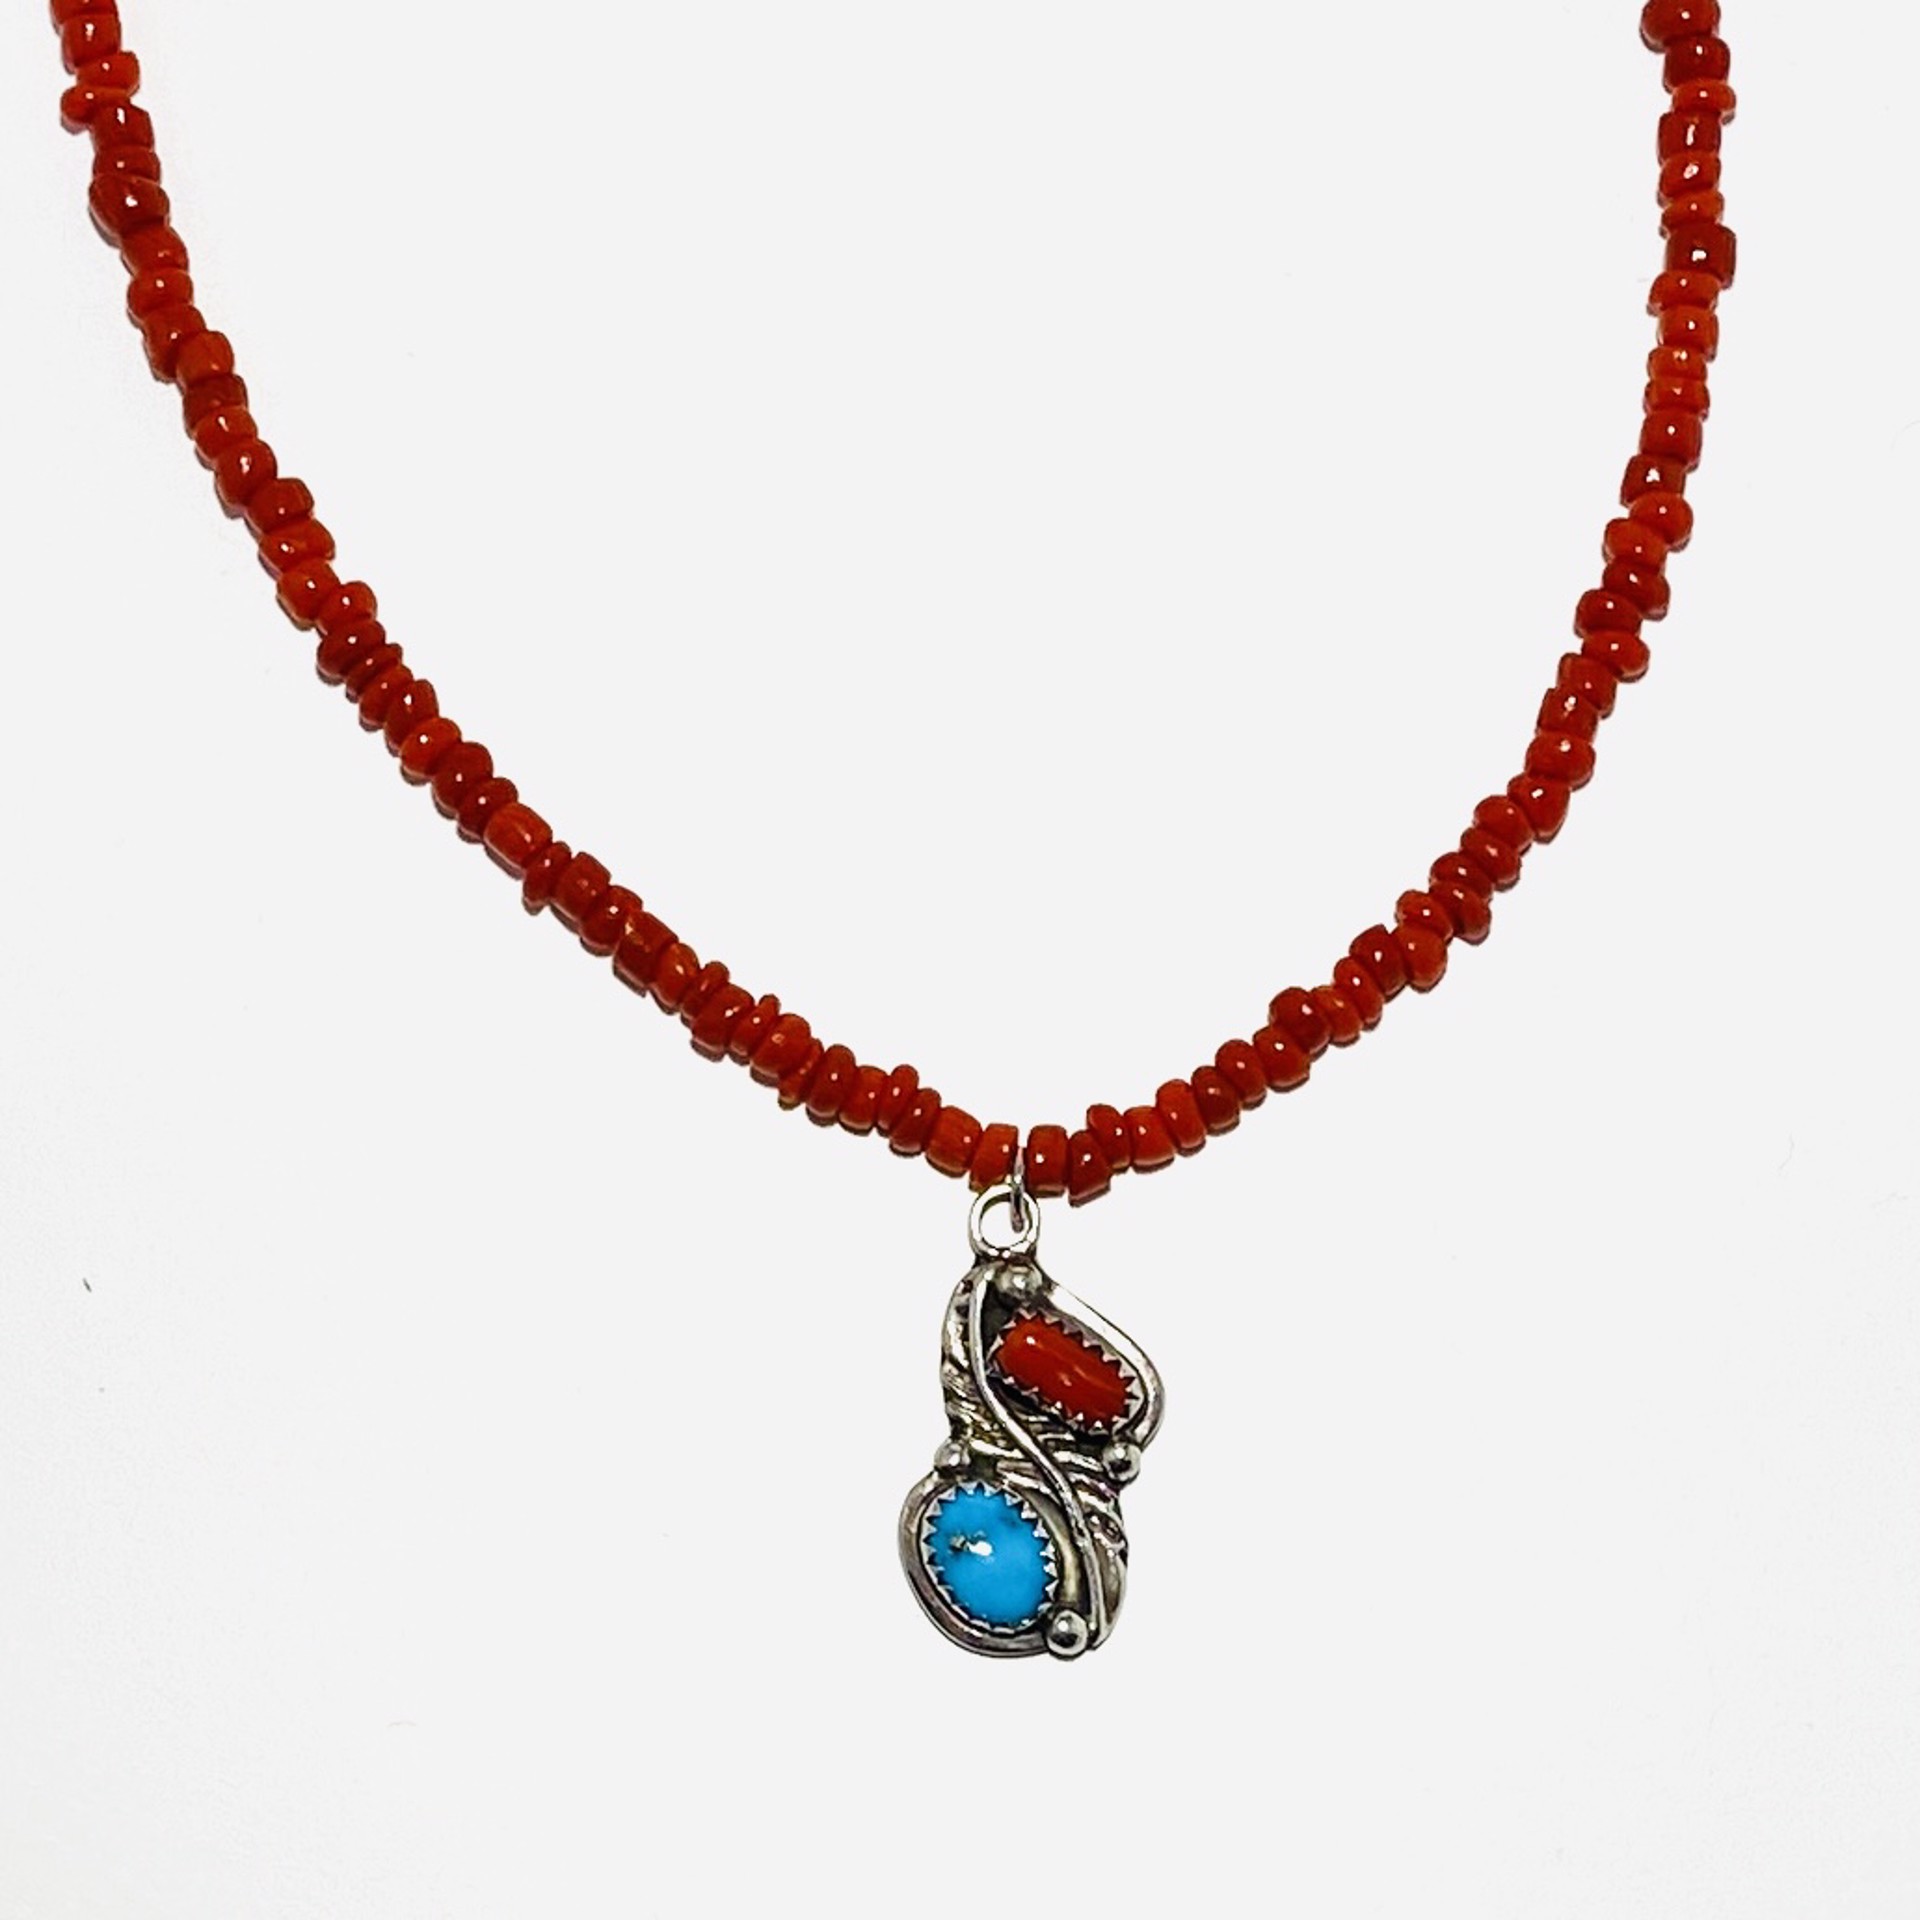 NT23-1 Coral and Turquoise Pendant on Coral Bead Necklace by Nance Trueworthy